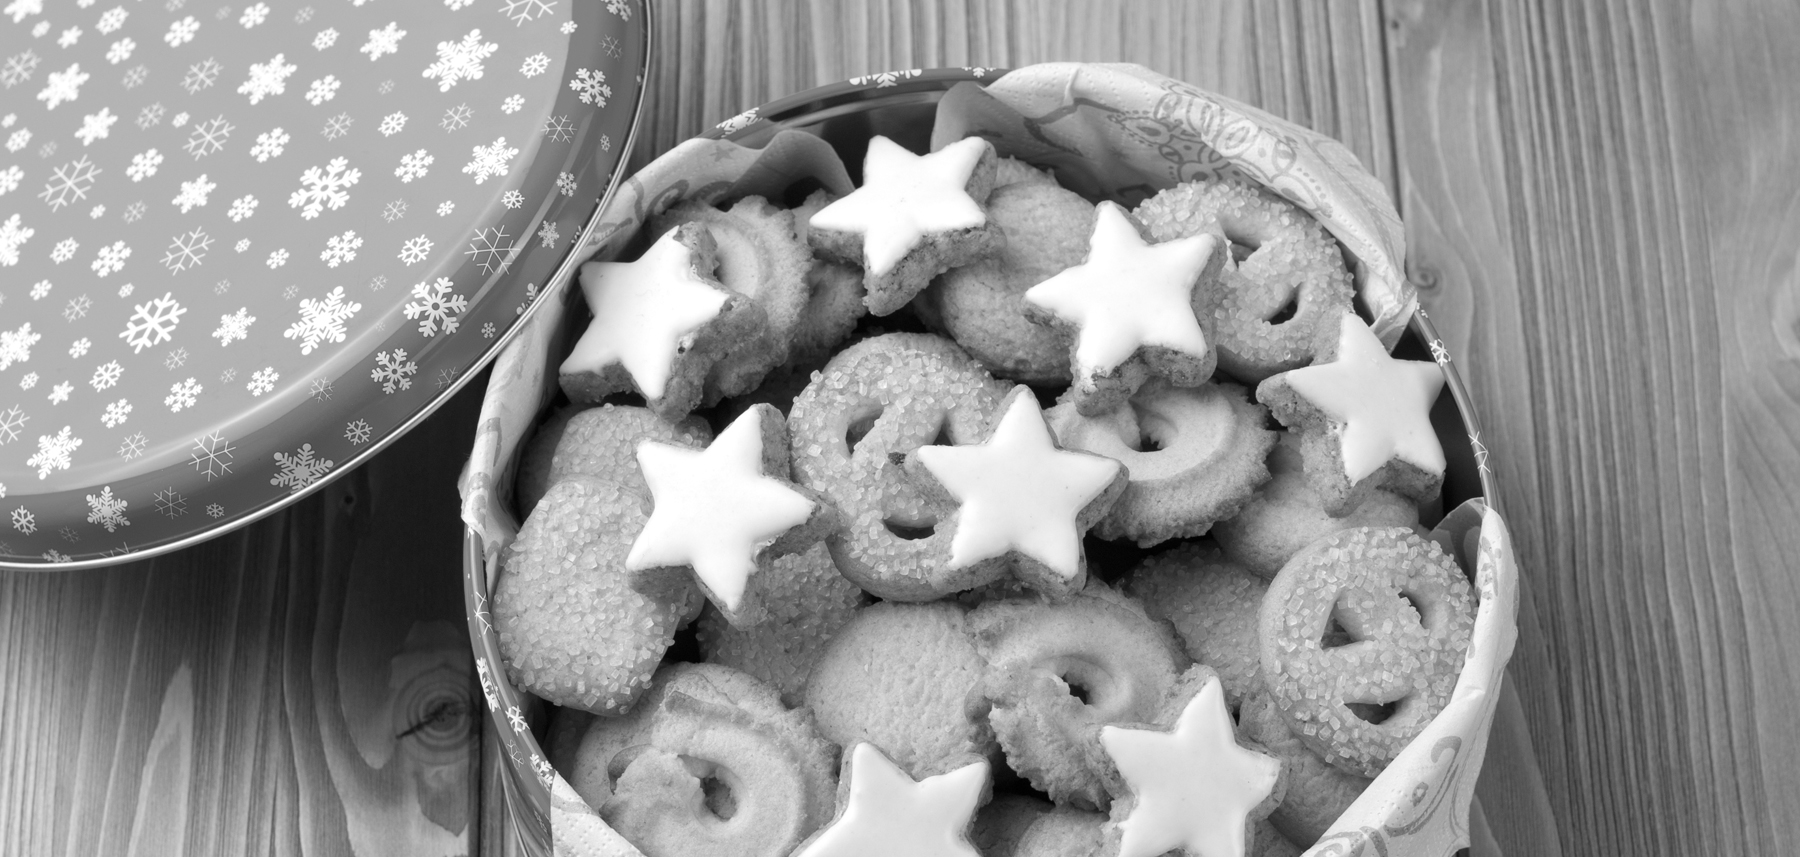 A tin of assorted christmas cookies on a wooden surface.